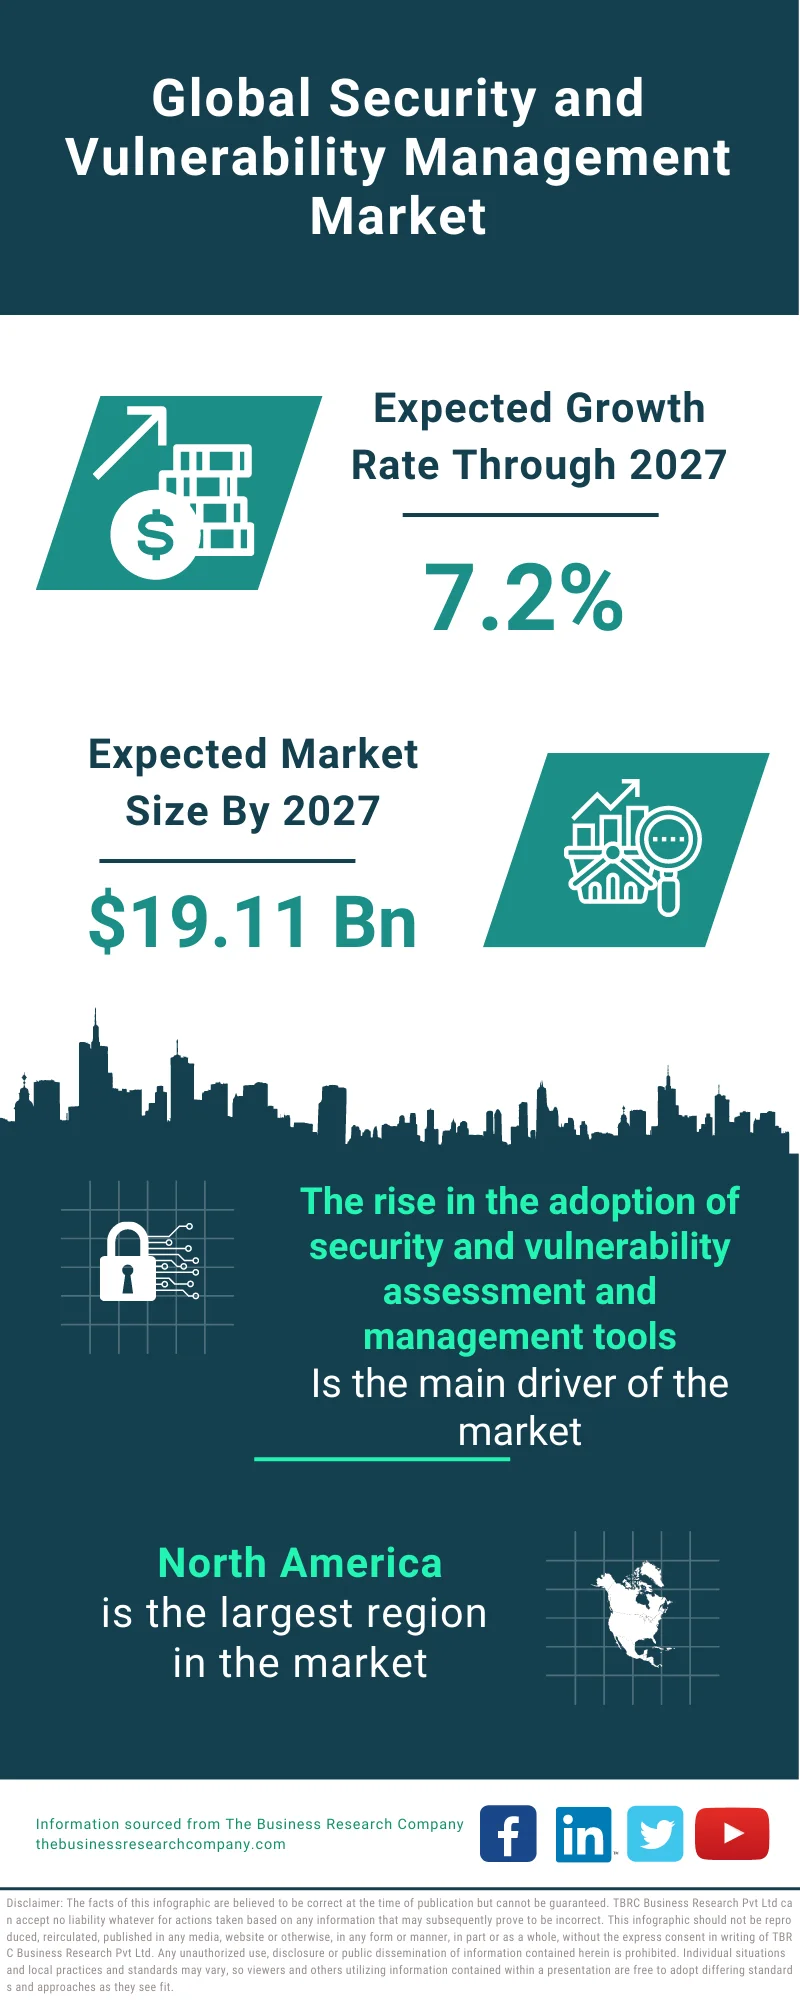 Security and Vulnerability Management Market